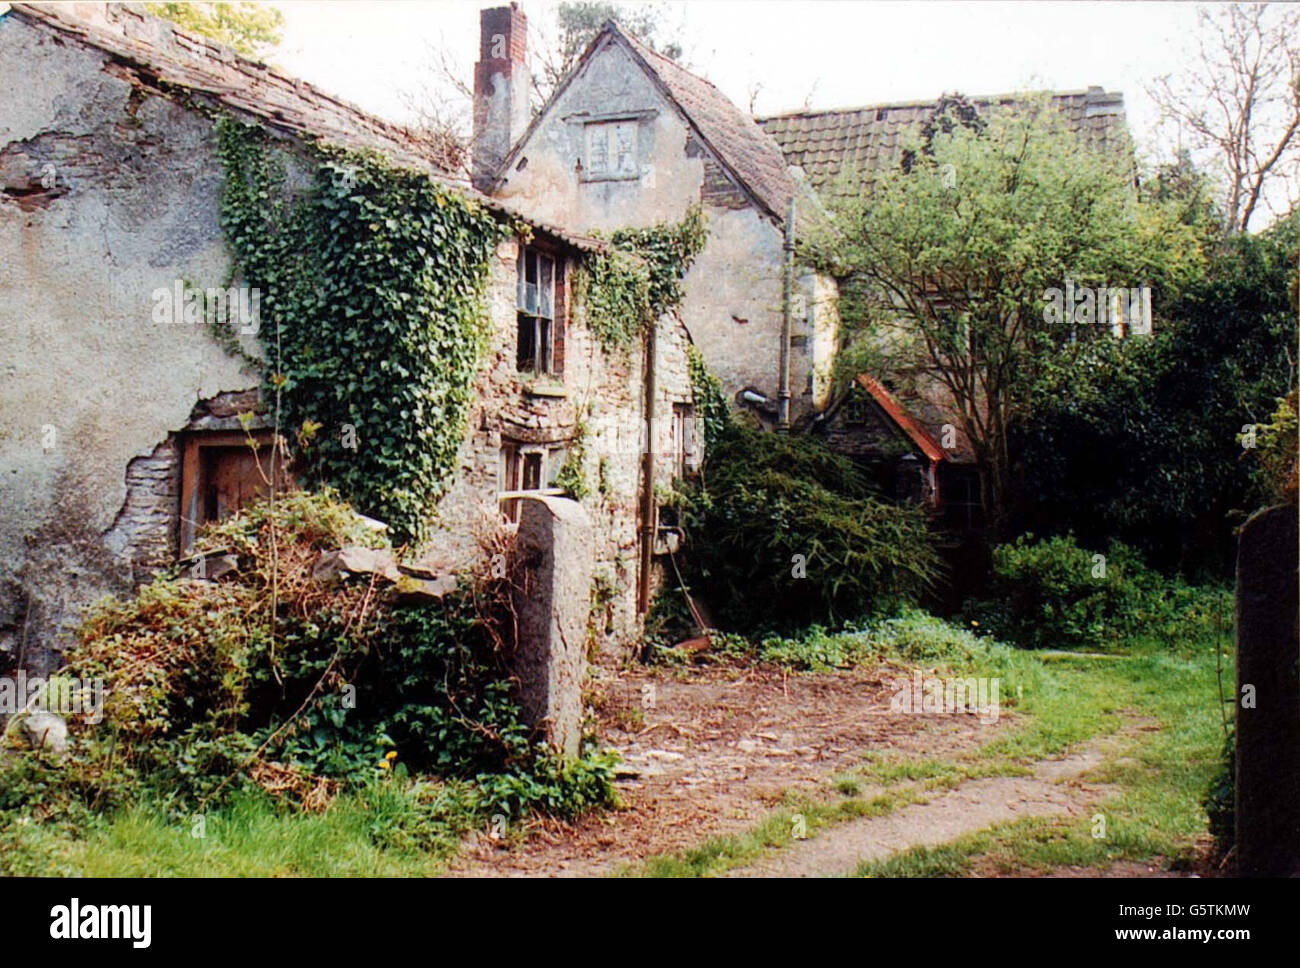 Bromley Farm, Downend, near Bristol, before restoration. The Scudamore family has owned the farm - parts of which date back to the 11th century - for almost sixty years and after it closed down as a market garden in the mid-nineties. *... and Mr and Mrs Bailey-Scudamor decided to restore it to its former glory themselves. Stock Photo